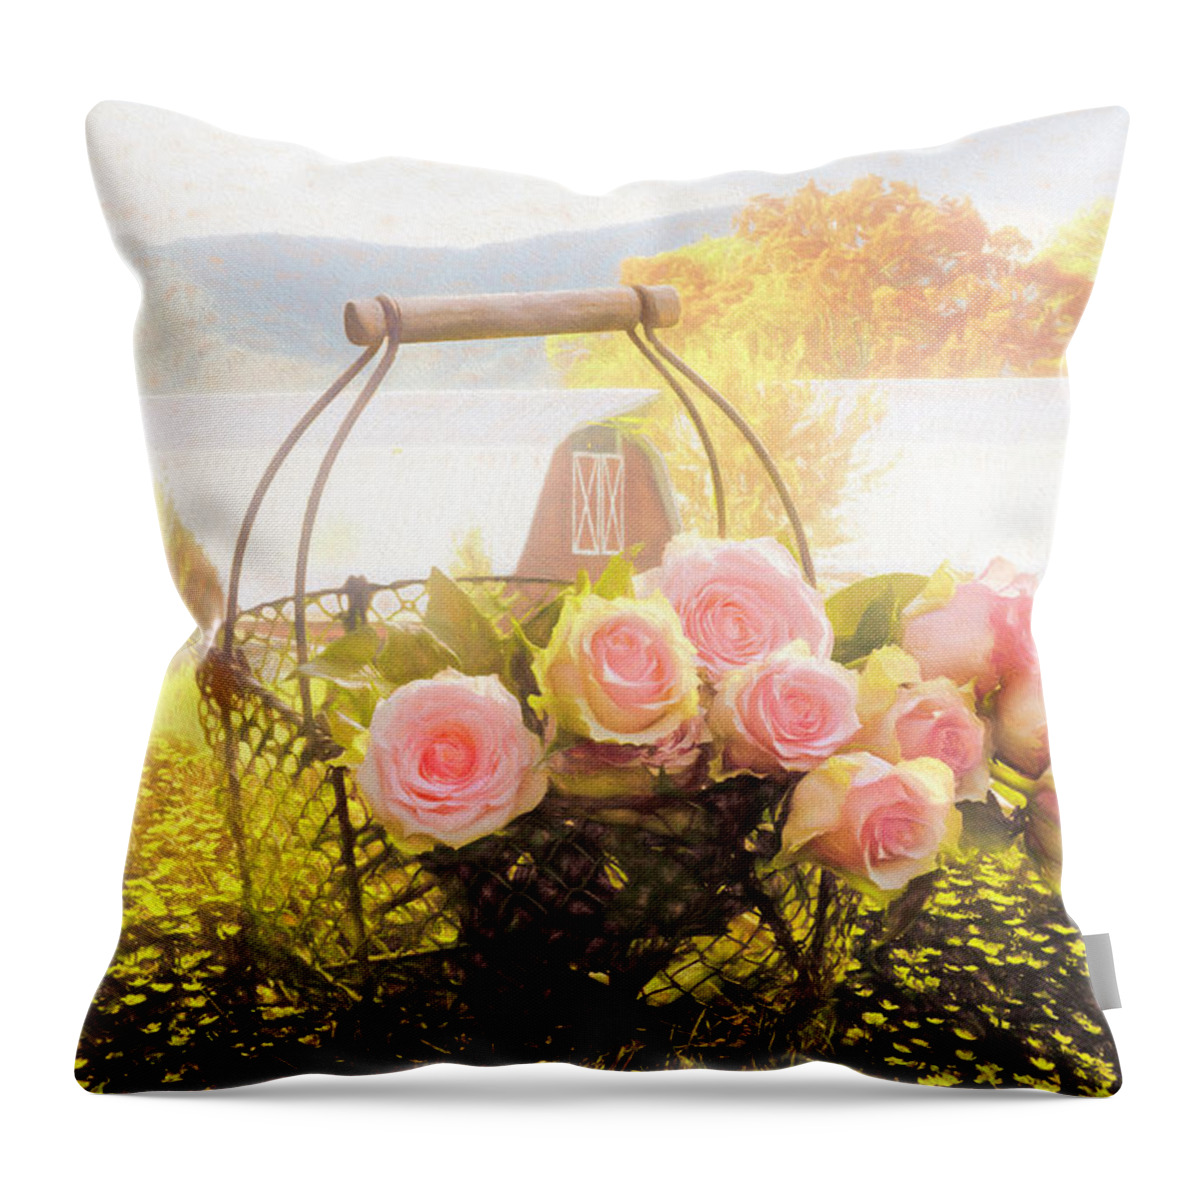 Appalachia Throw Pillow featuring the photograph Fresh From the Farm Morning Softness by Debra and Dave Vanderlaan